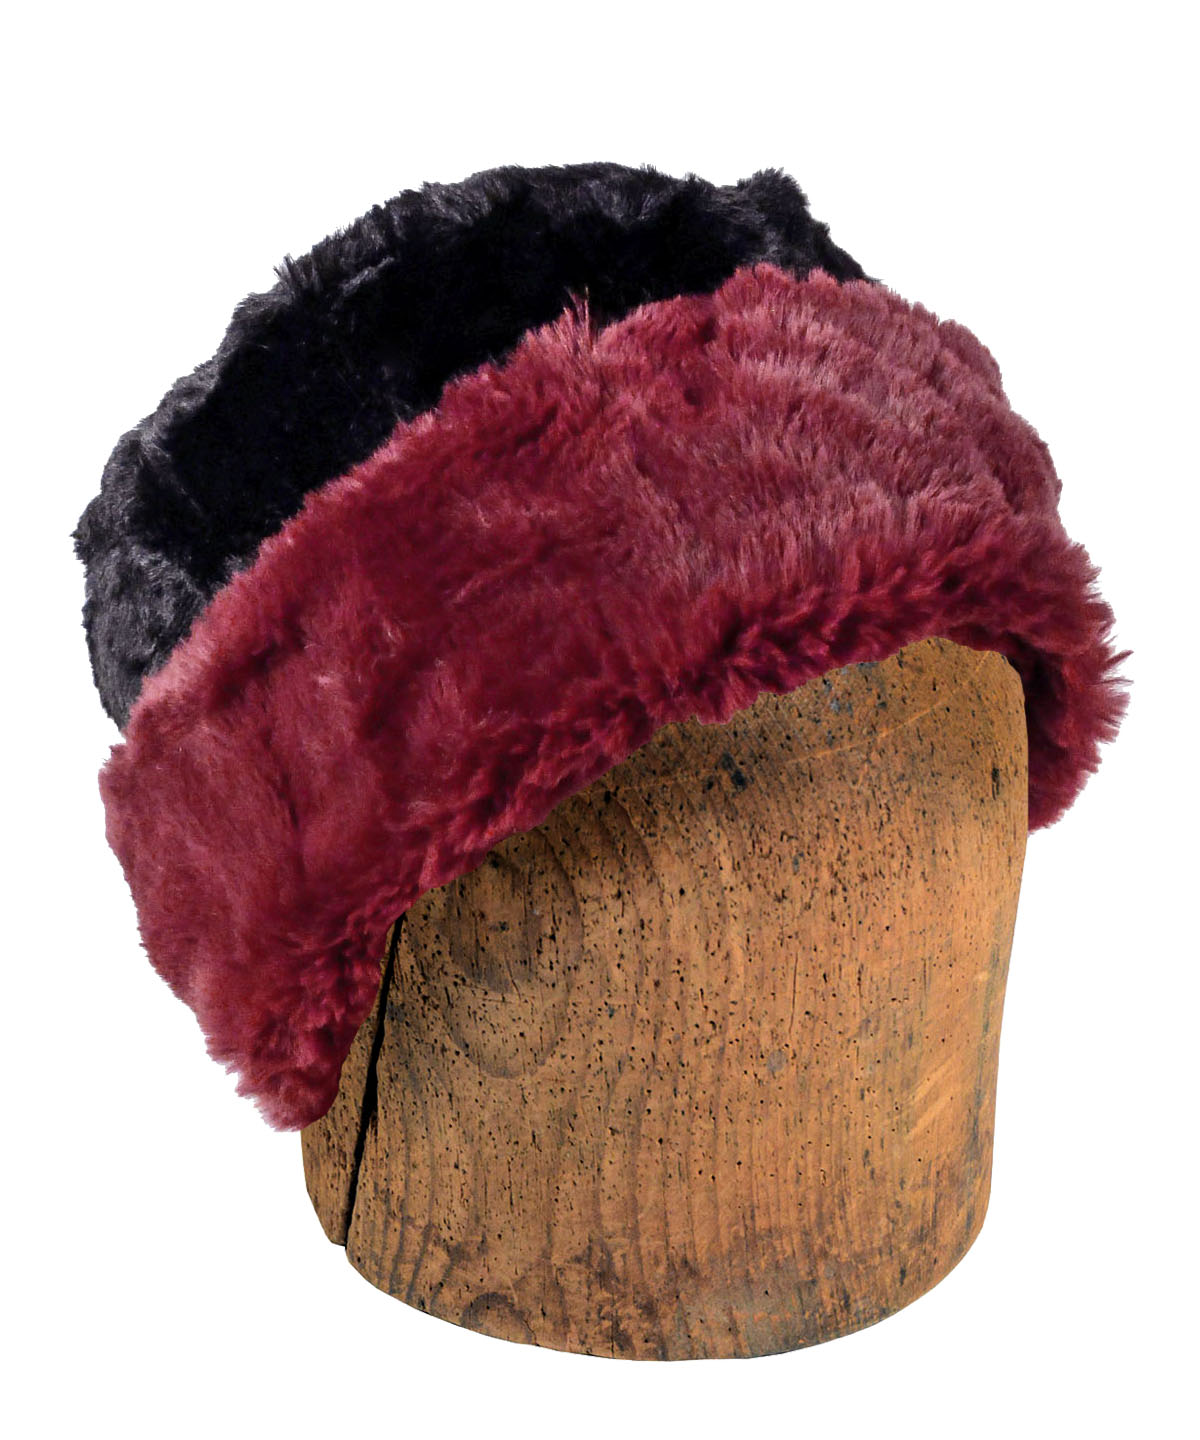 Men's 2-tone Cuffed Pillbox, Reversed | Luxury Faux Fur in Cranberry Creek and Cuddly Black Faux Fur | Handmade in Seattle WA by Pandemonium Millinery USA